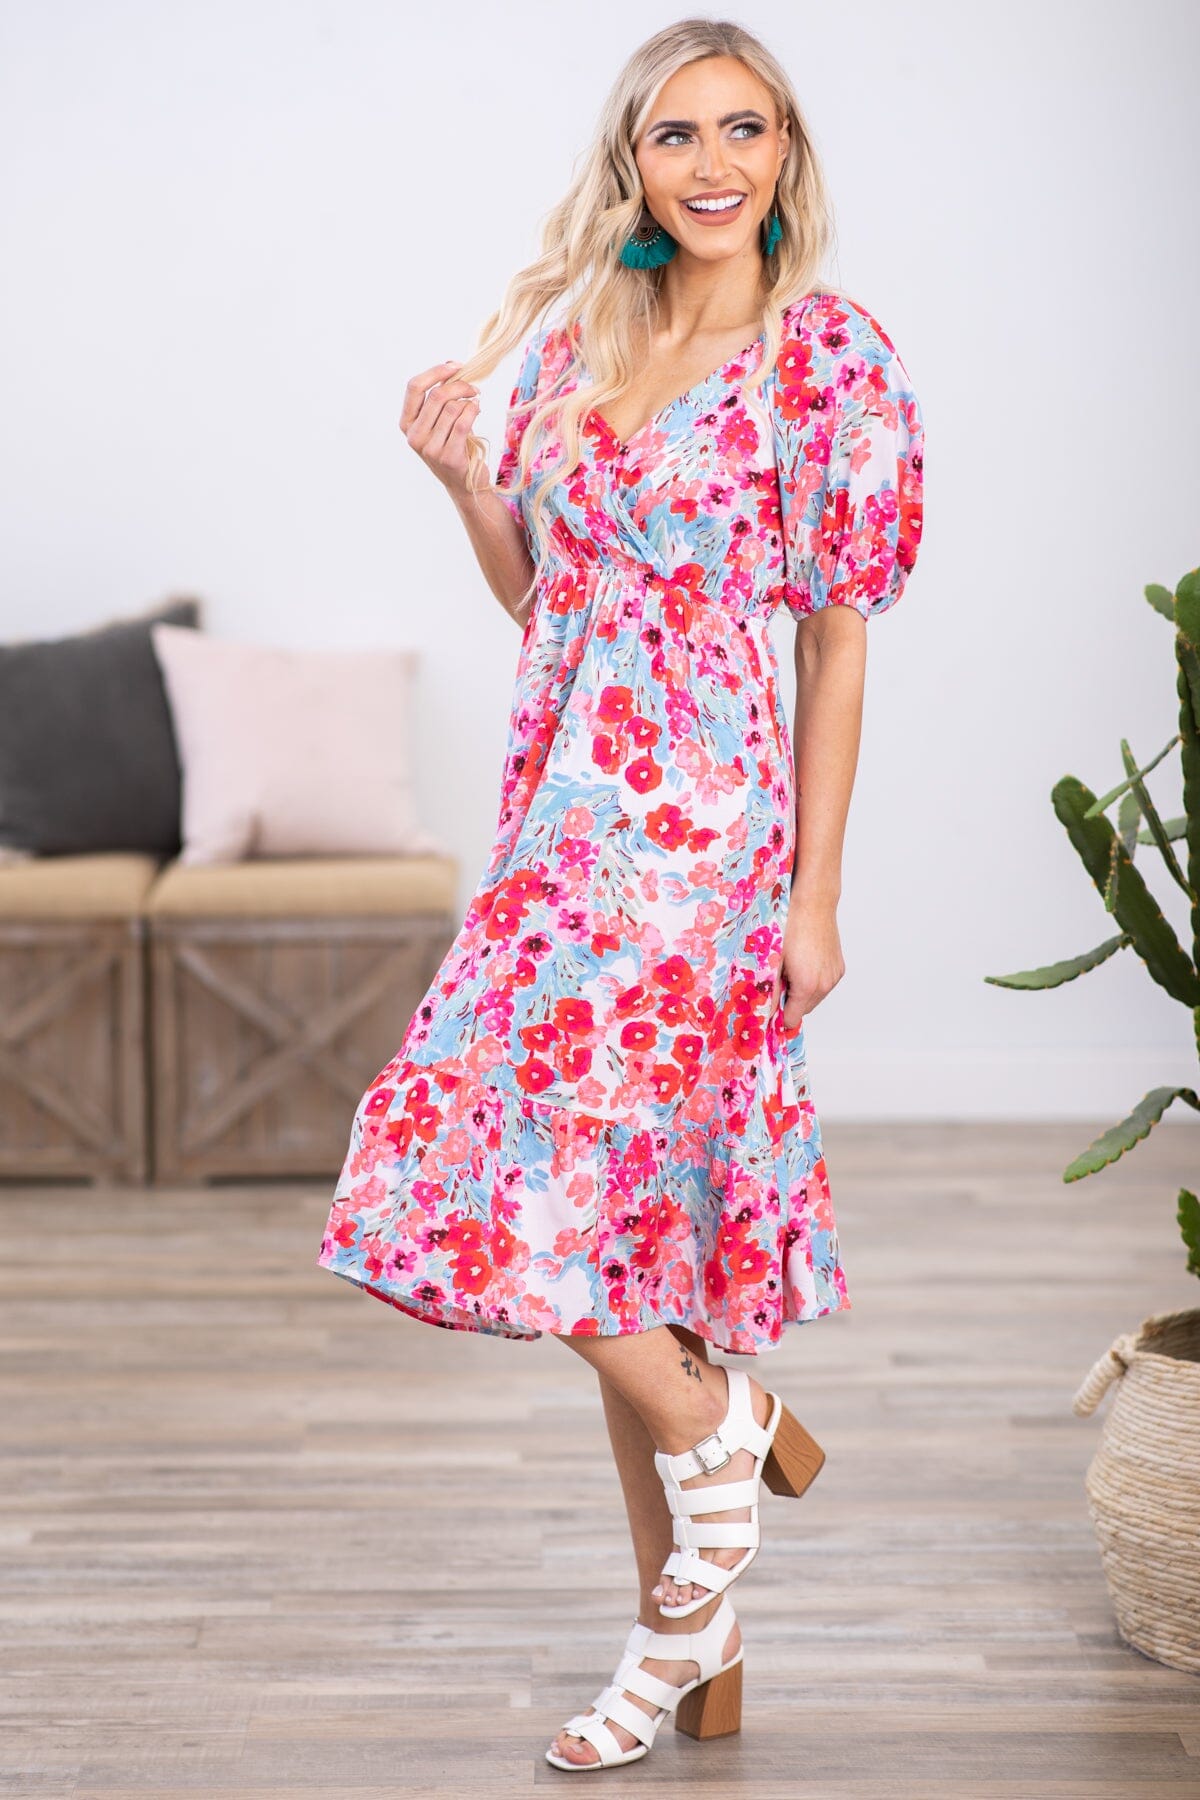 blue and pink floral dress